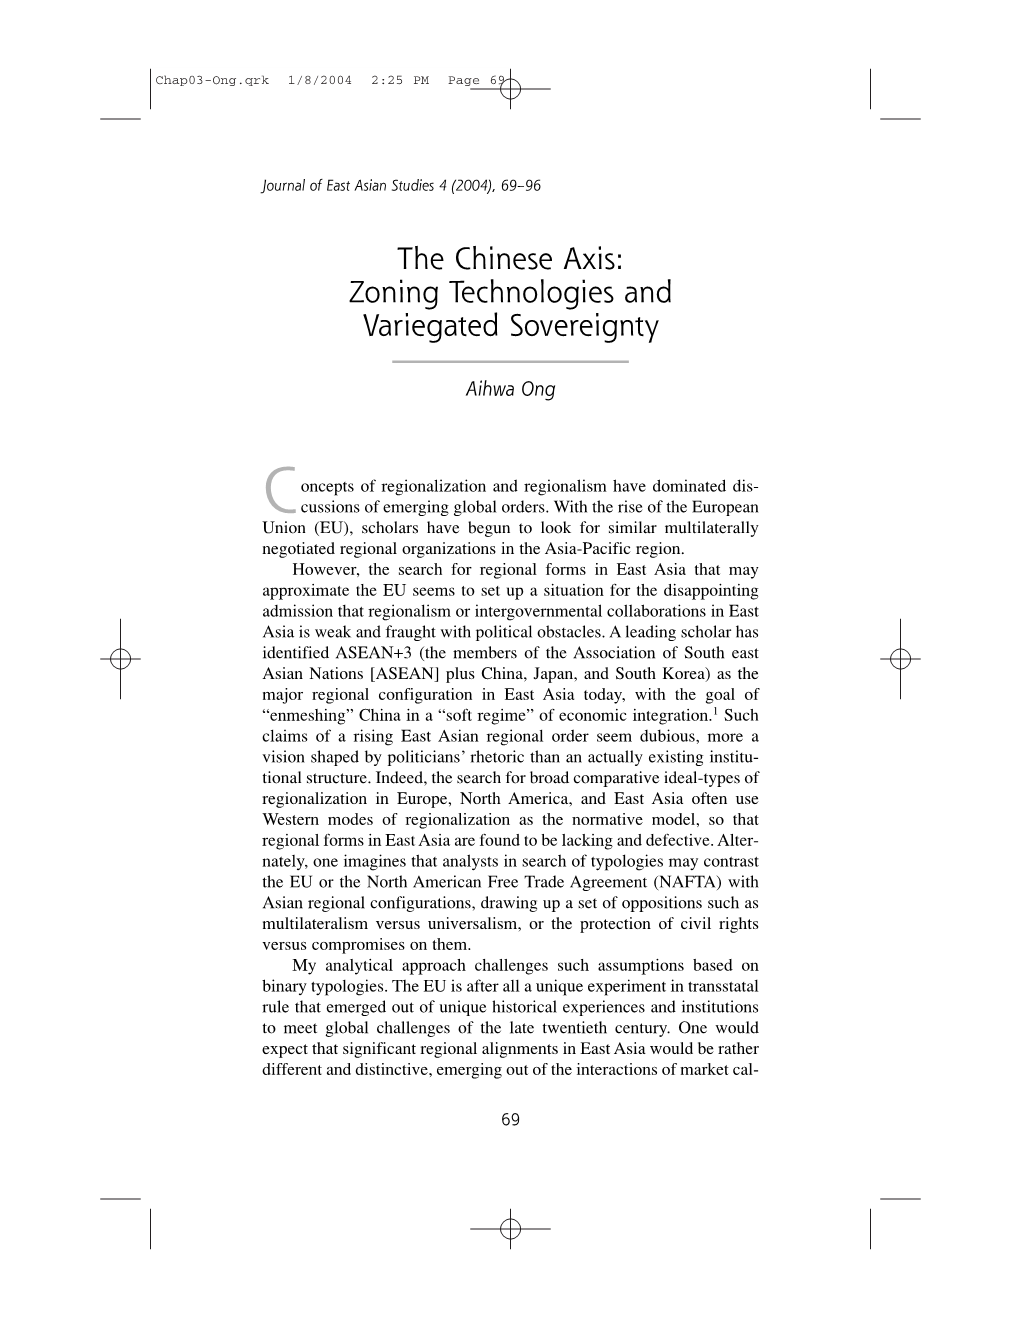 The Chinese Axis: Zoning Technologies and Variegated Sovereignty